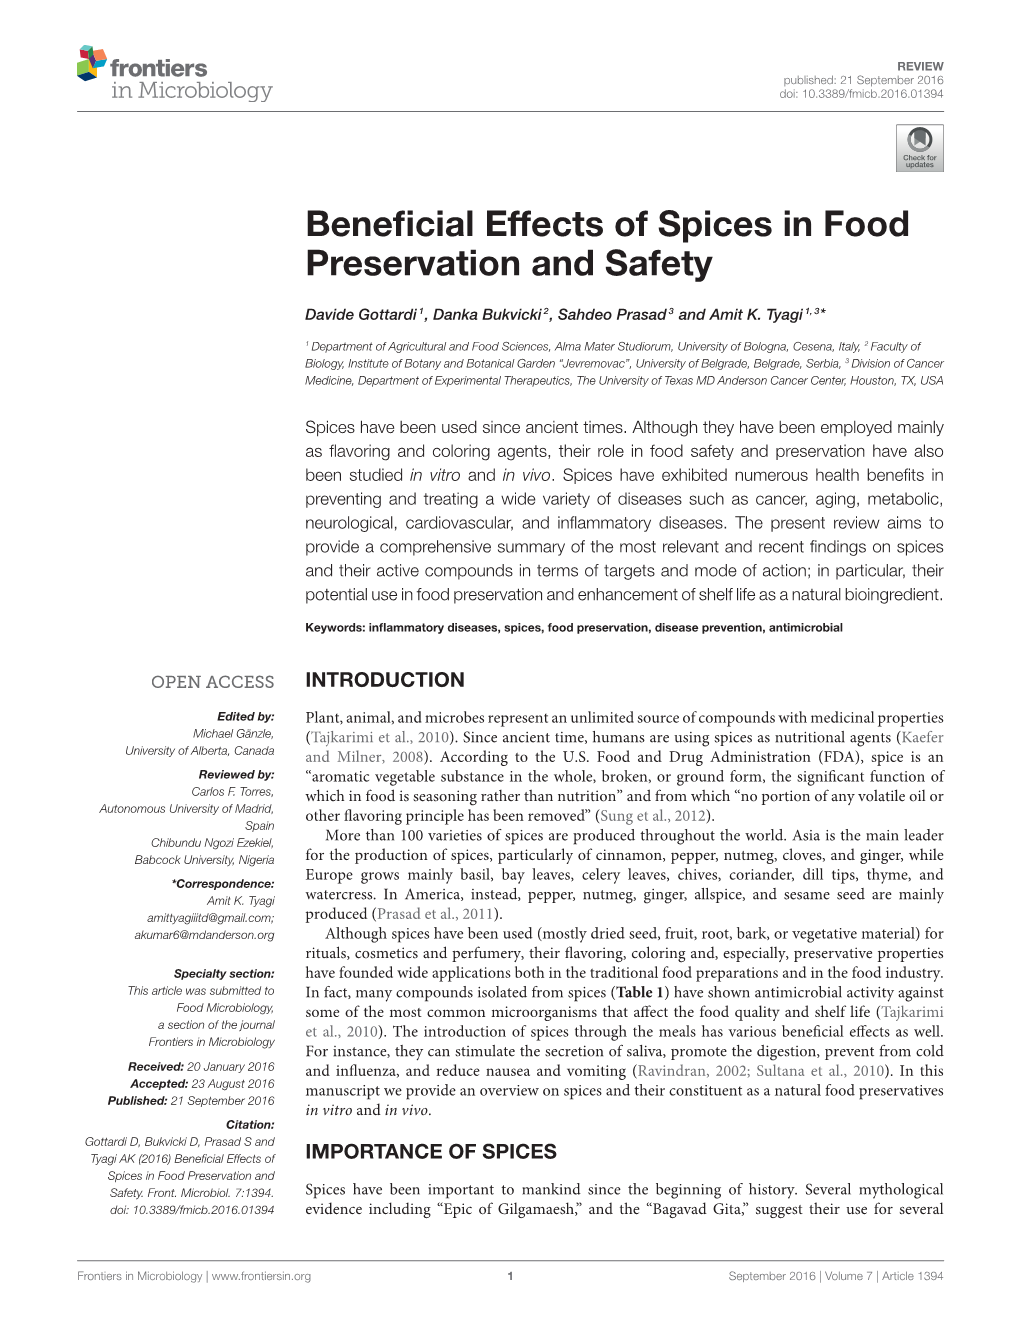 Beneficial Effects of Spices in Food Preservation and Safety